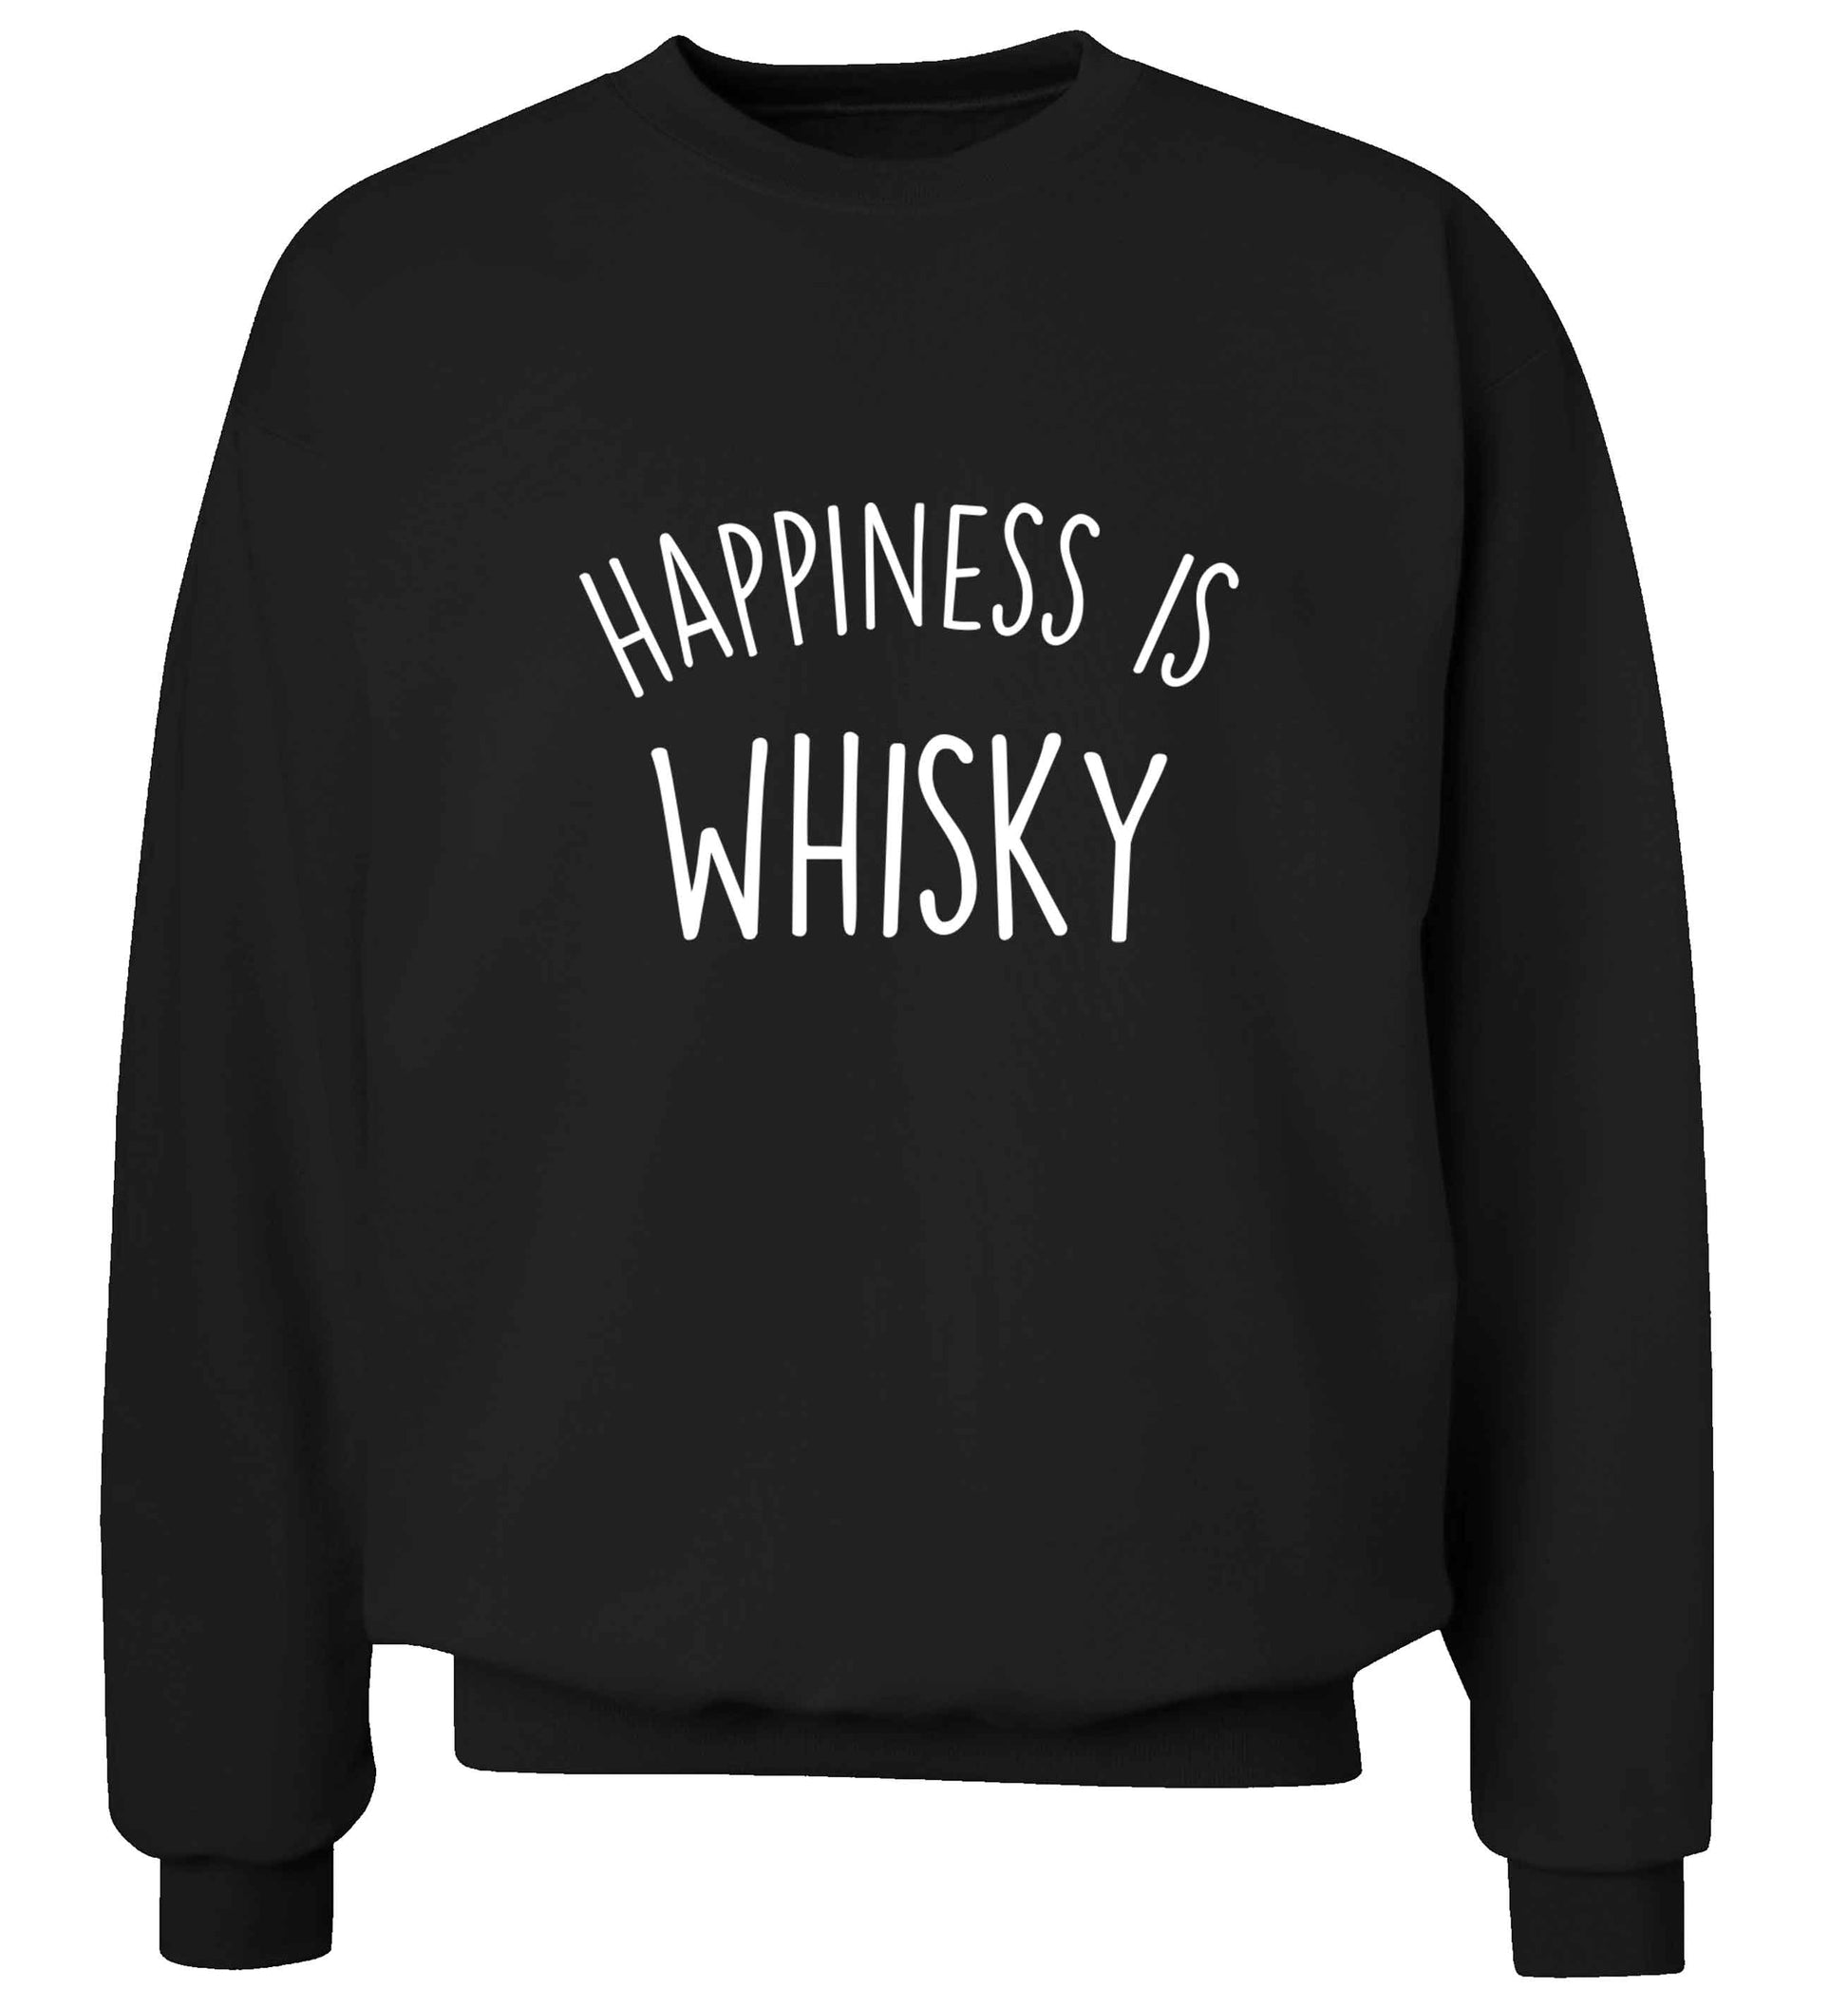 Happiness is whisky adult's unisex black sweater 2XL